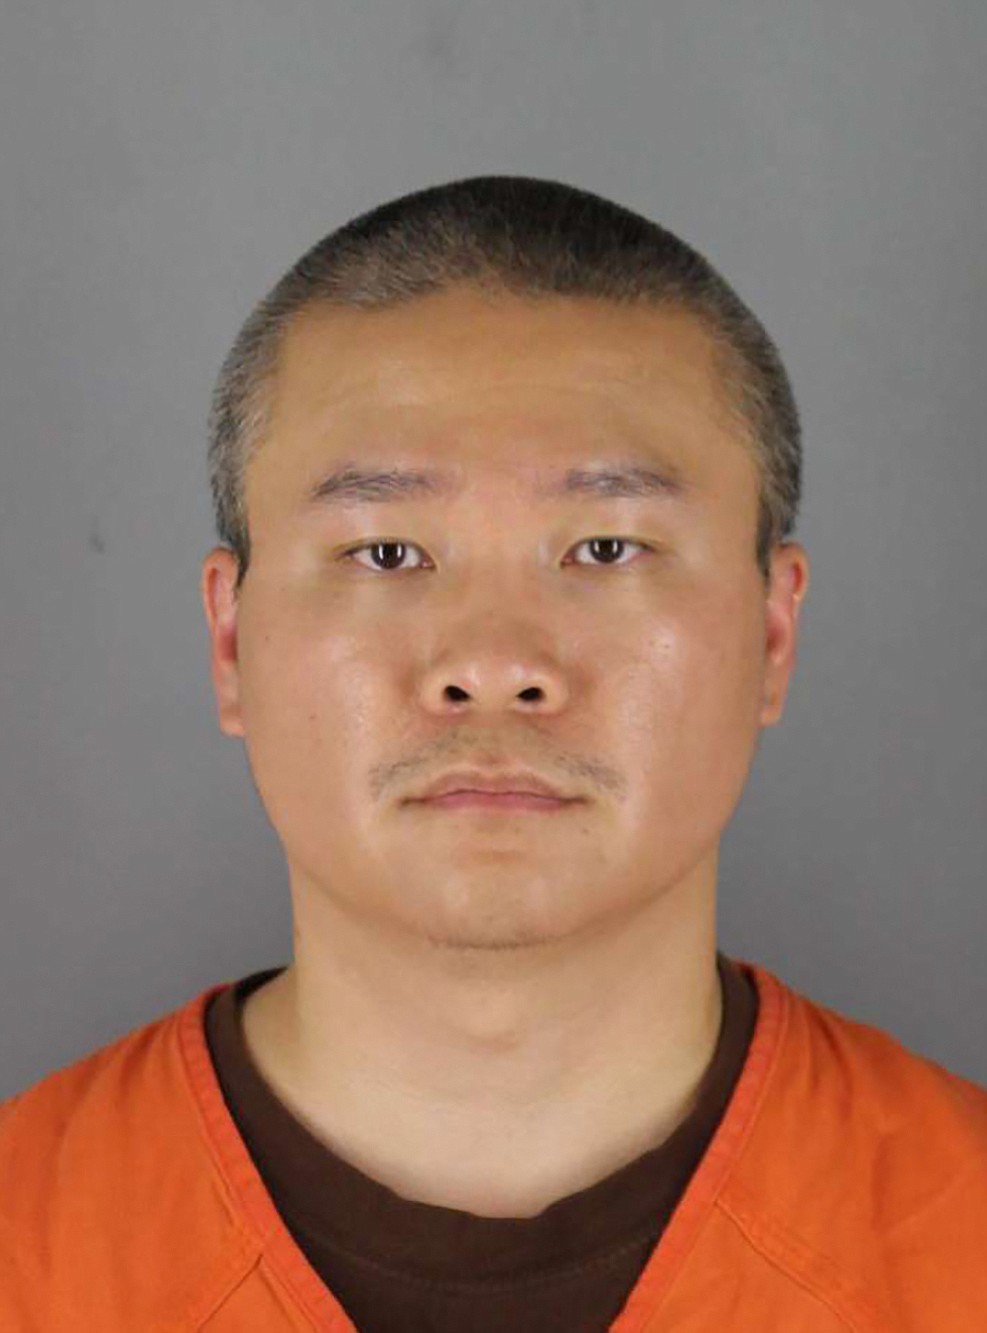 This combination of photos provided by the Hennepin County Sheriff's Office in Minnesota on Wednesday, June 3, 2020, shows Tou Thao. Thao and two other Minneapolis police officers have been charged with aiding and abetting Derek Chauvin, who is charged with second-degree murder of George Floyd, a black man who died after being restrained by the Minneapolis police officers on May 25. (Hennepin County Sheriff's Office via AP)